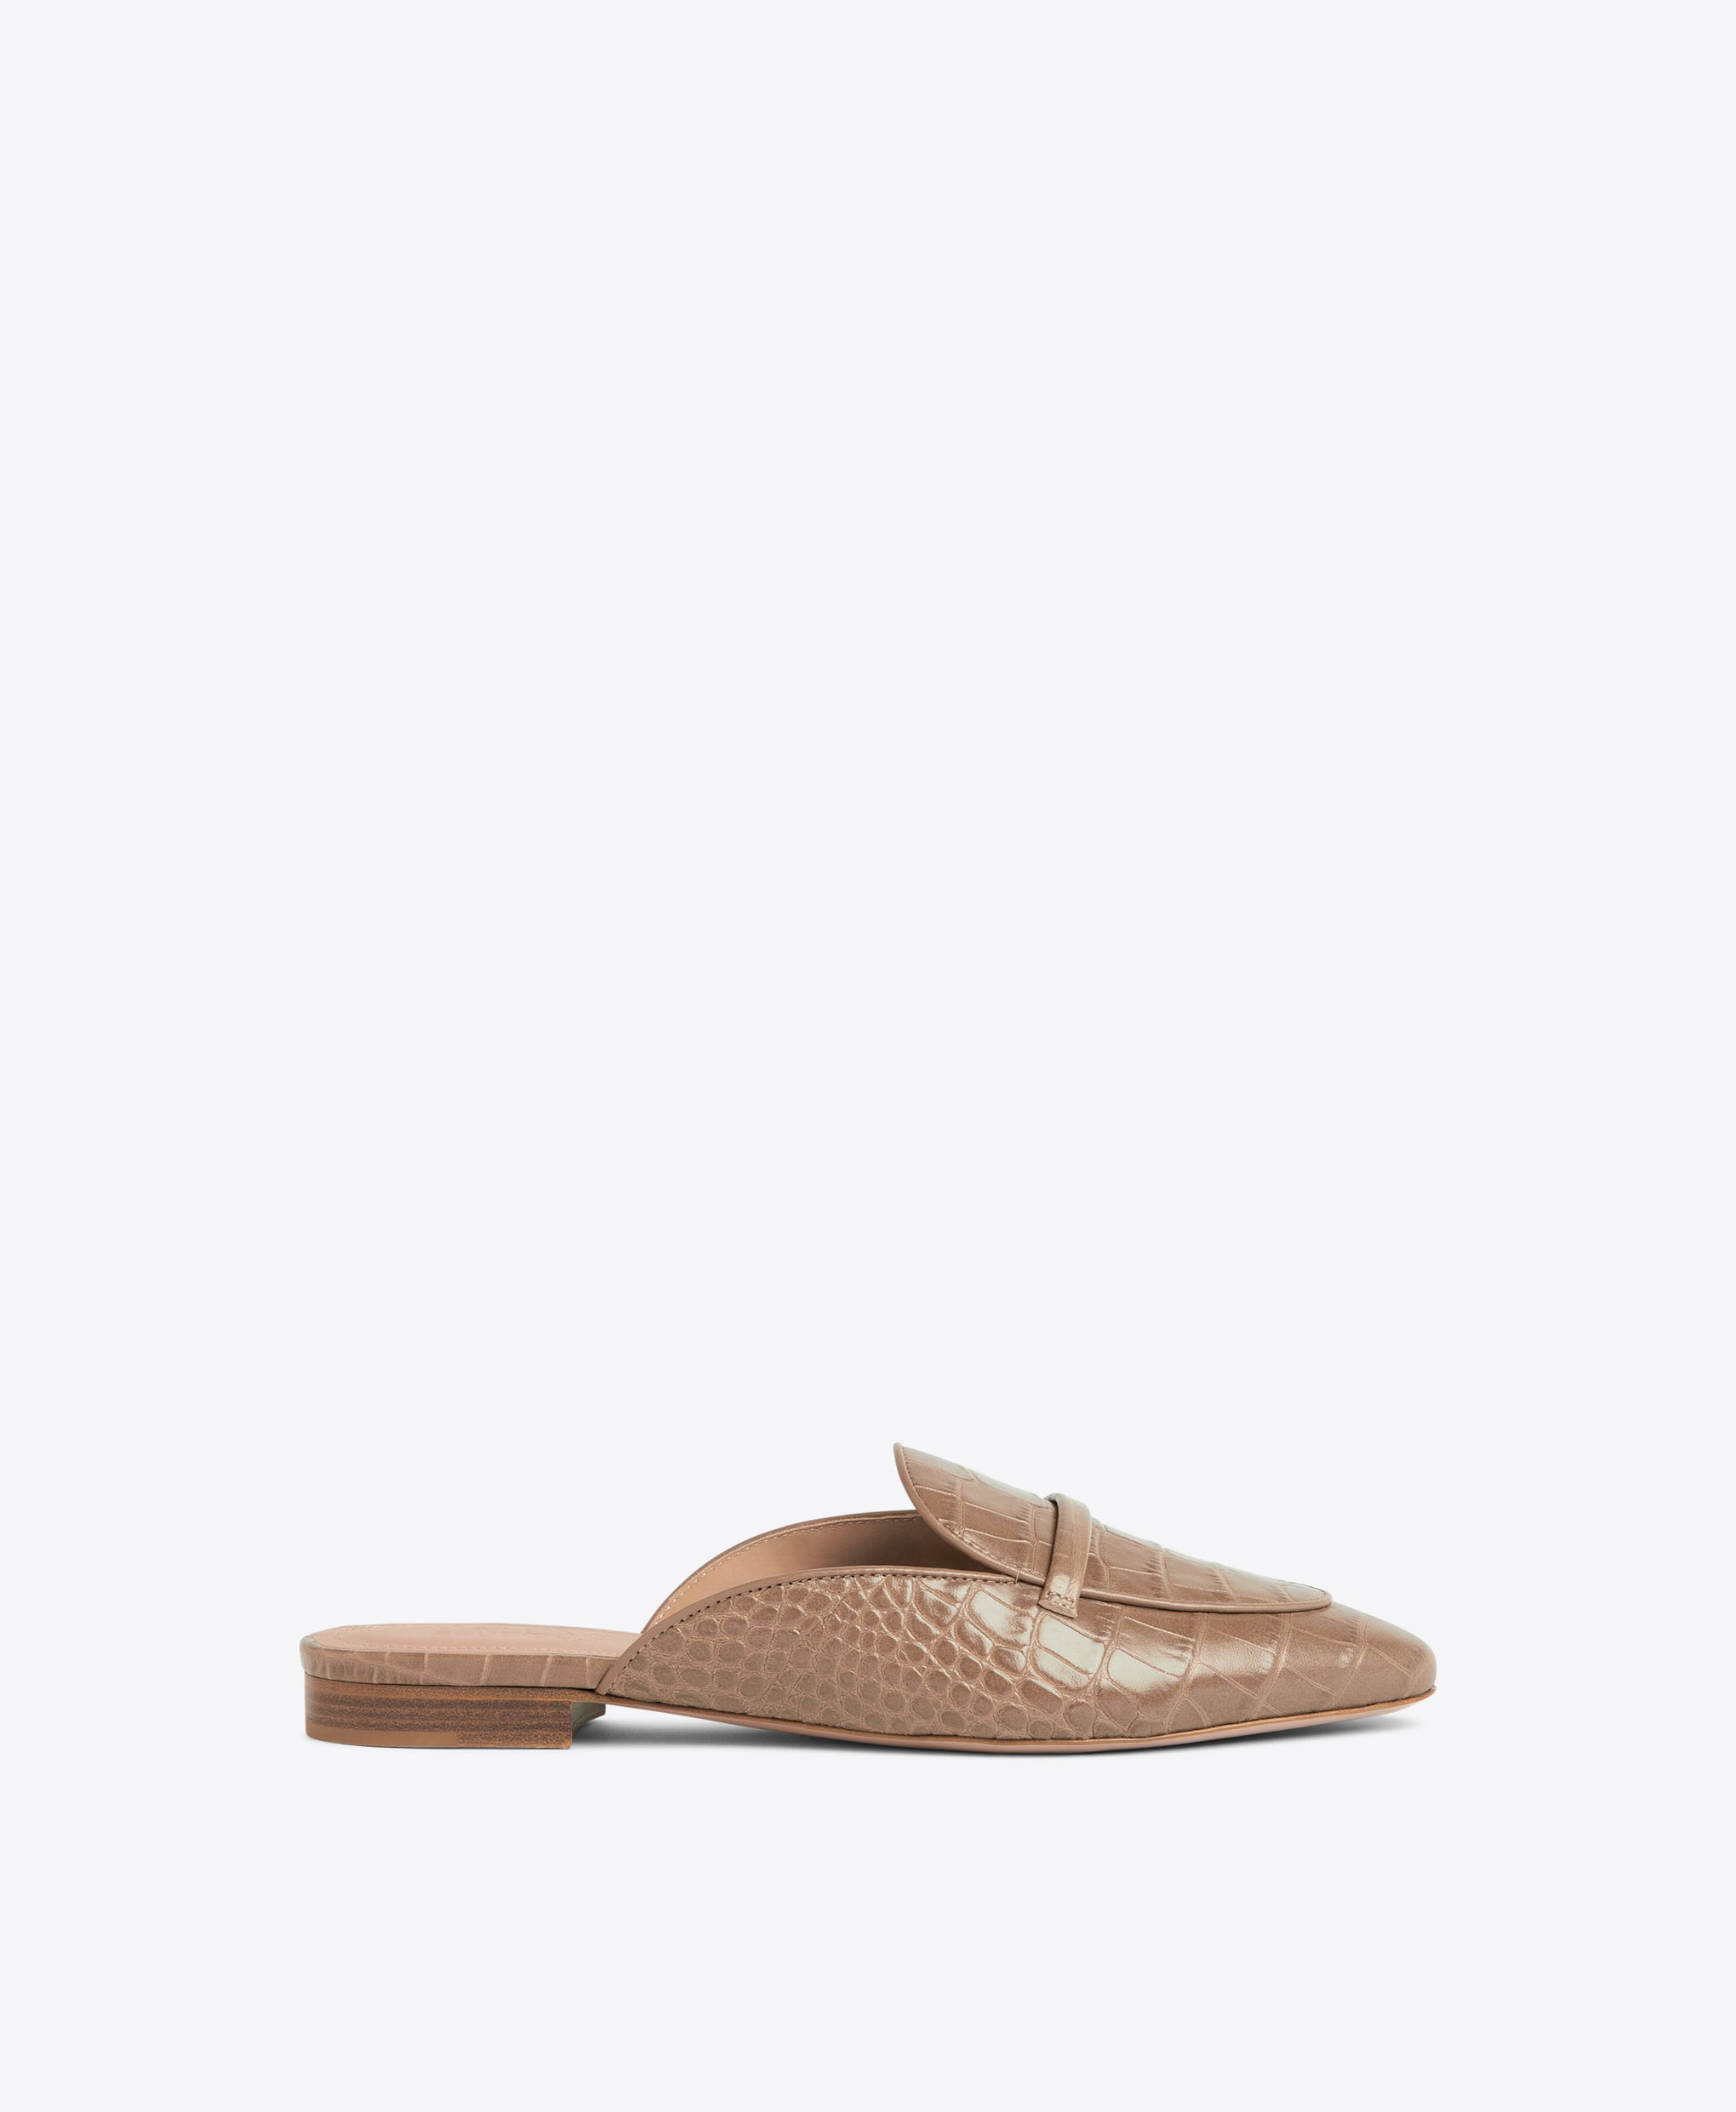 Malone Souliers Berto Taupe Embossed Leather Flat Slides